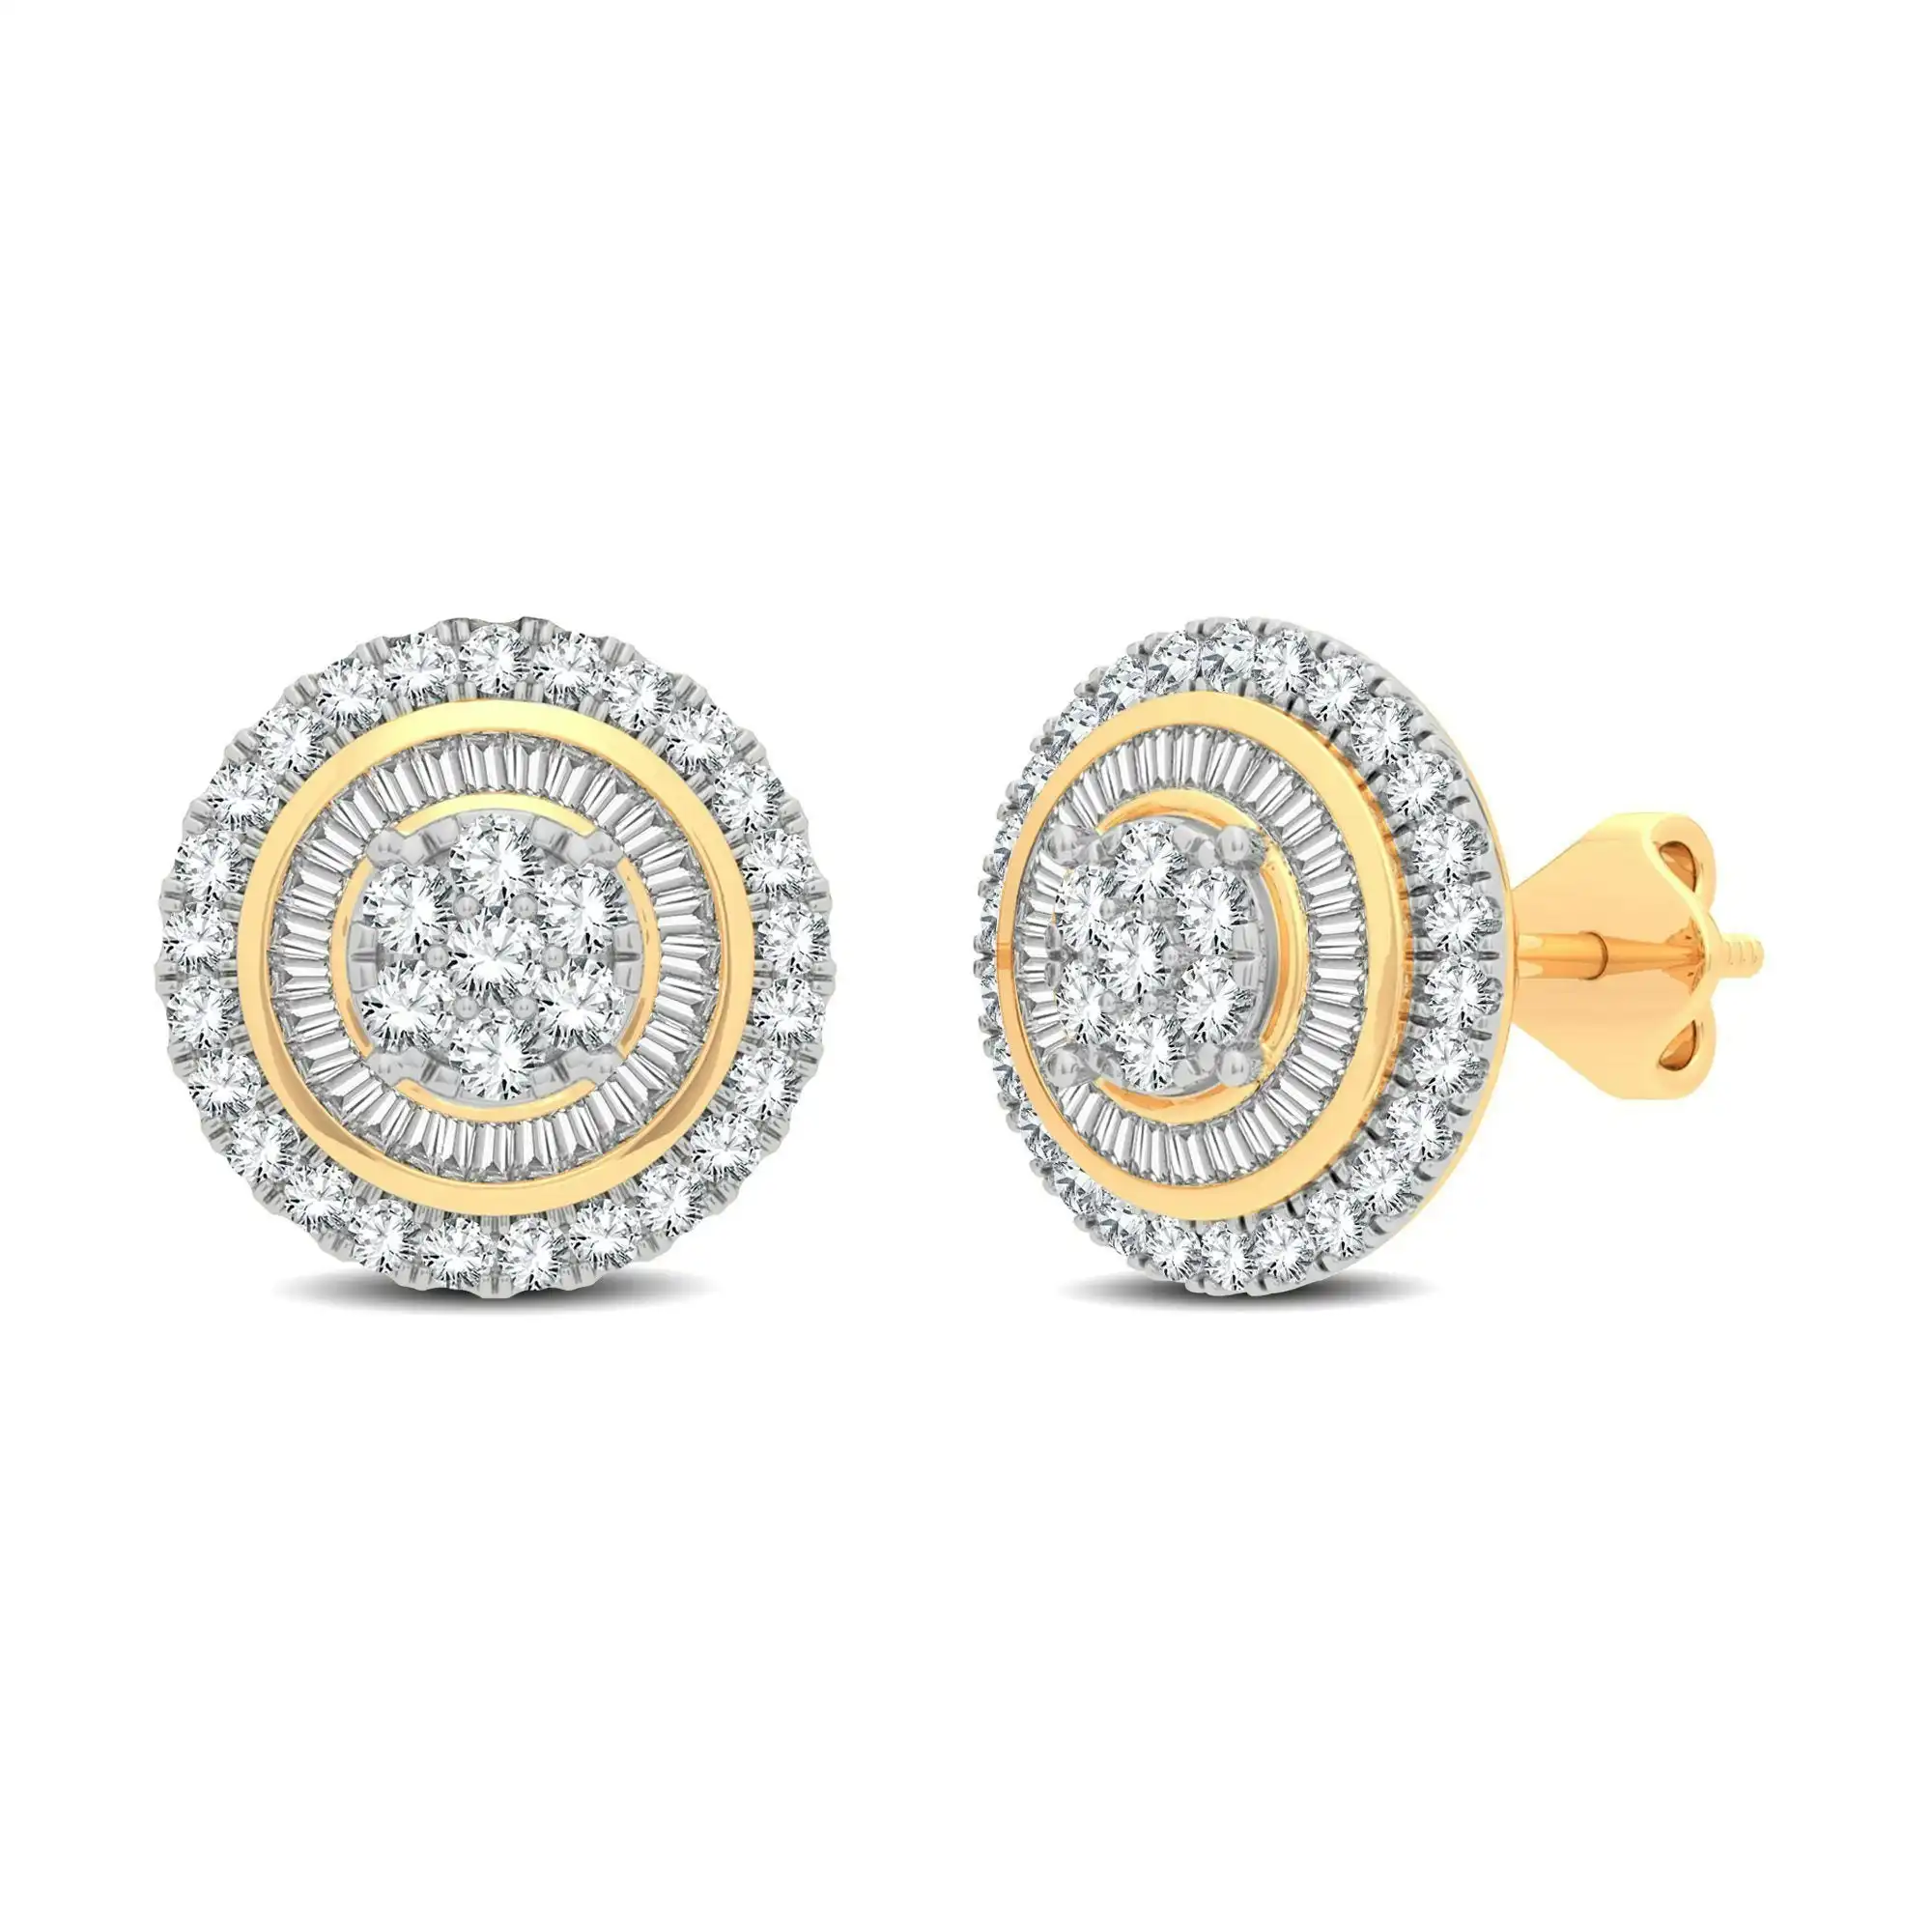 Halo Stud Earrings with 3/4ct of Diamonds in 9ct Yellow Gold